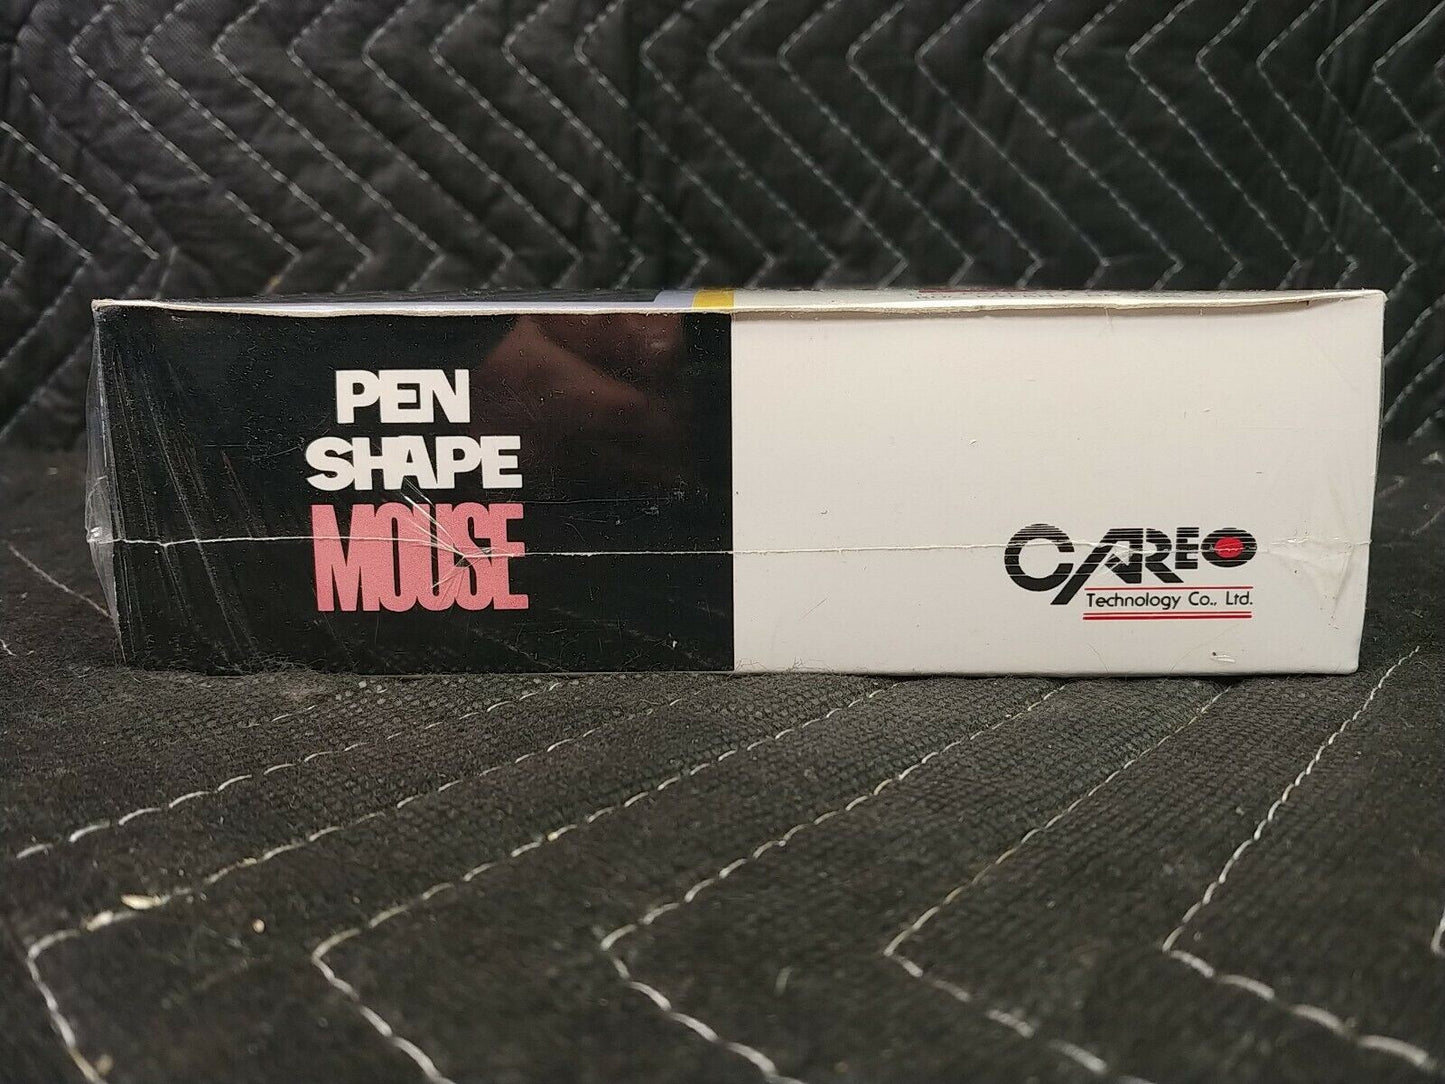 Vintage NOS Careo Technology Co. Pen Shape Mouse RIGHTIN XR1-PSM Sealed Box